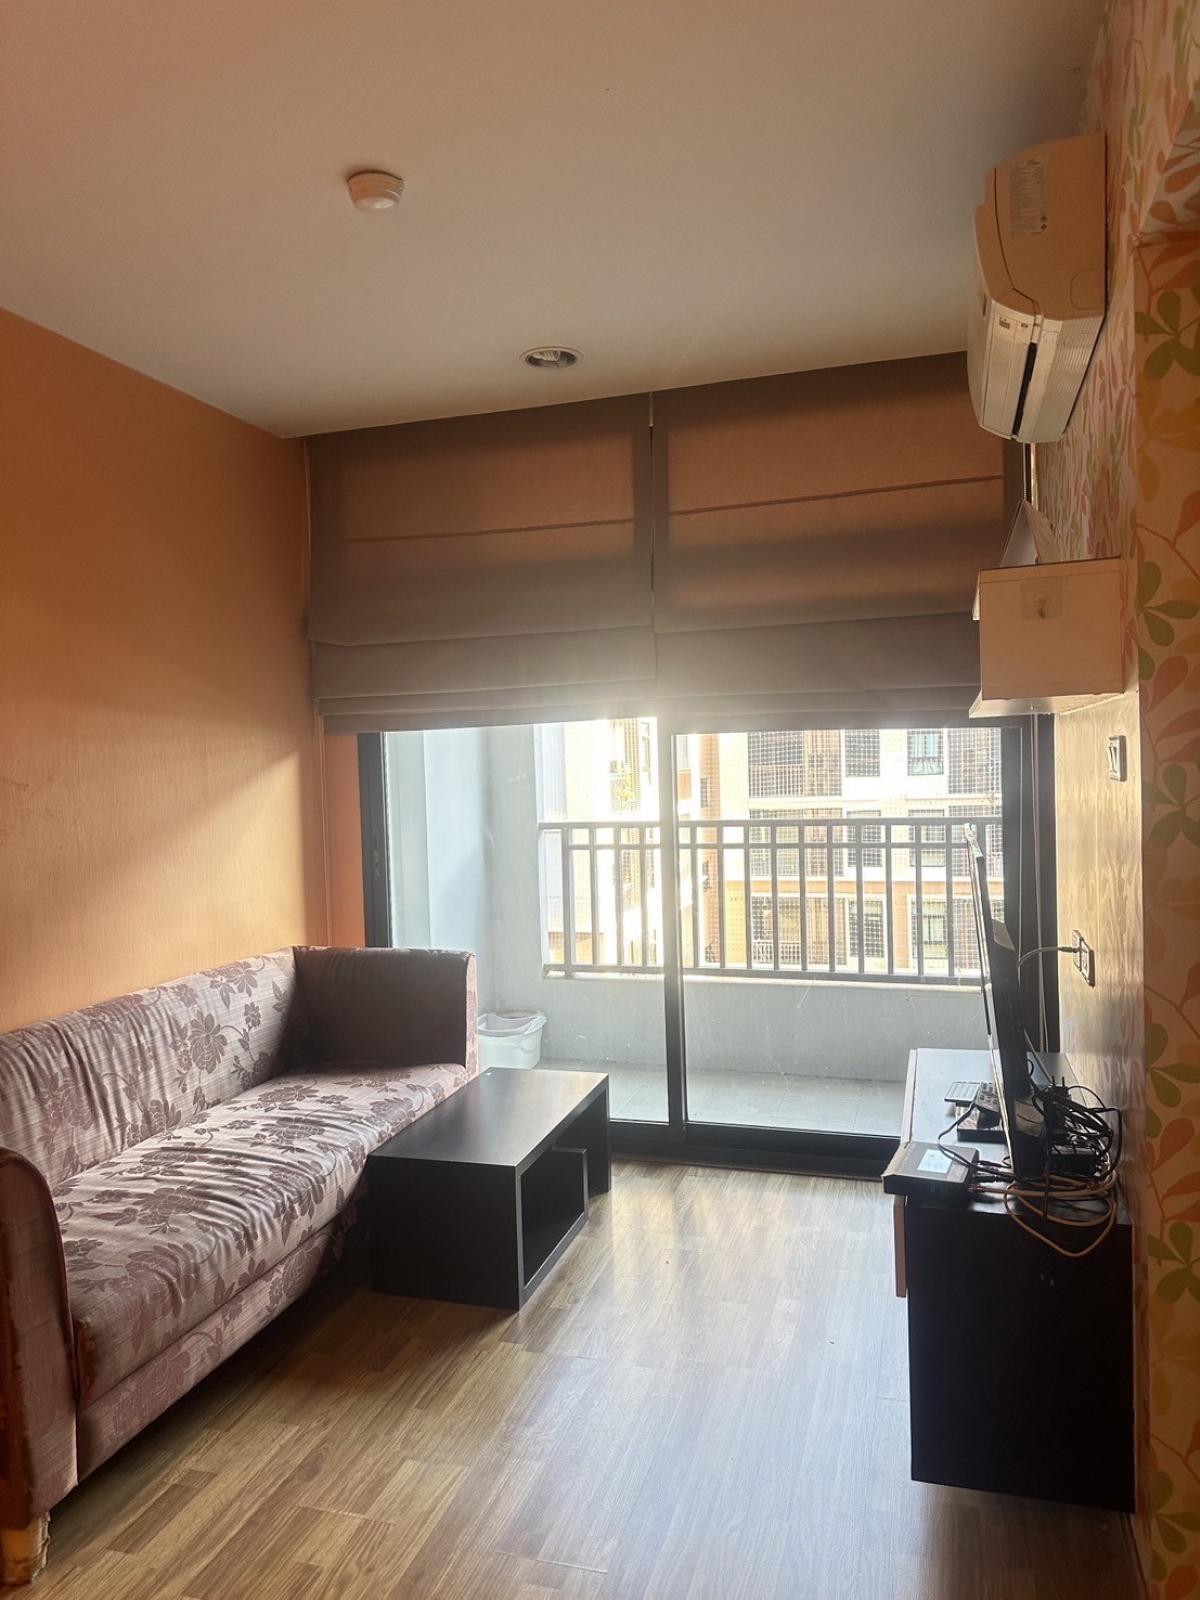 For RentCondoKaset Nawamin,Ladplakao : Baan Navatara Condo Kaset Nawamin is ready to move in, fully furnished, convenient travel, expressway entry and exit points.